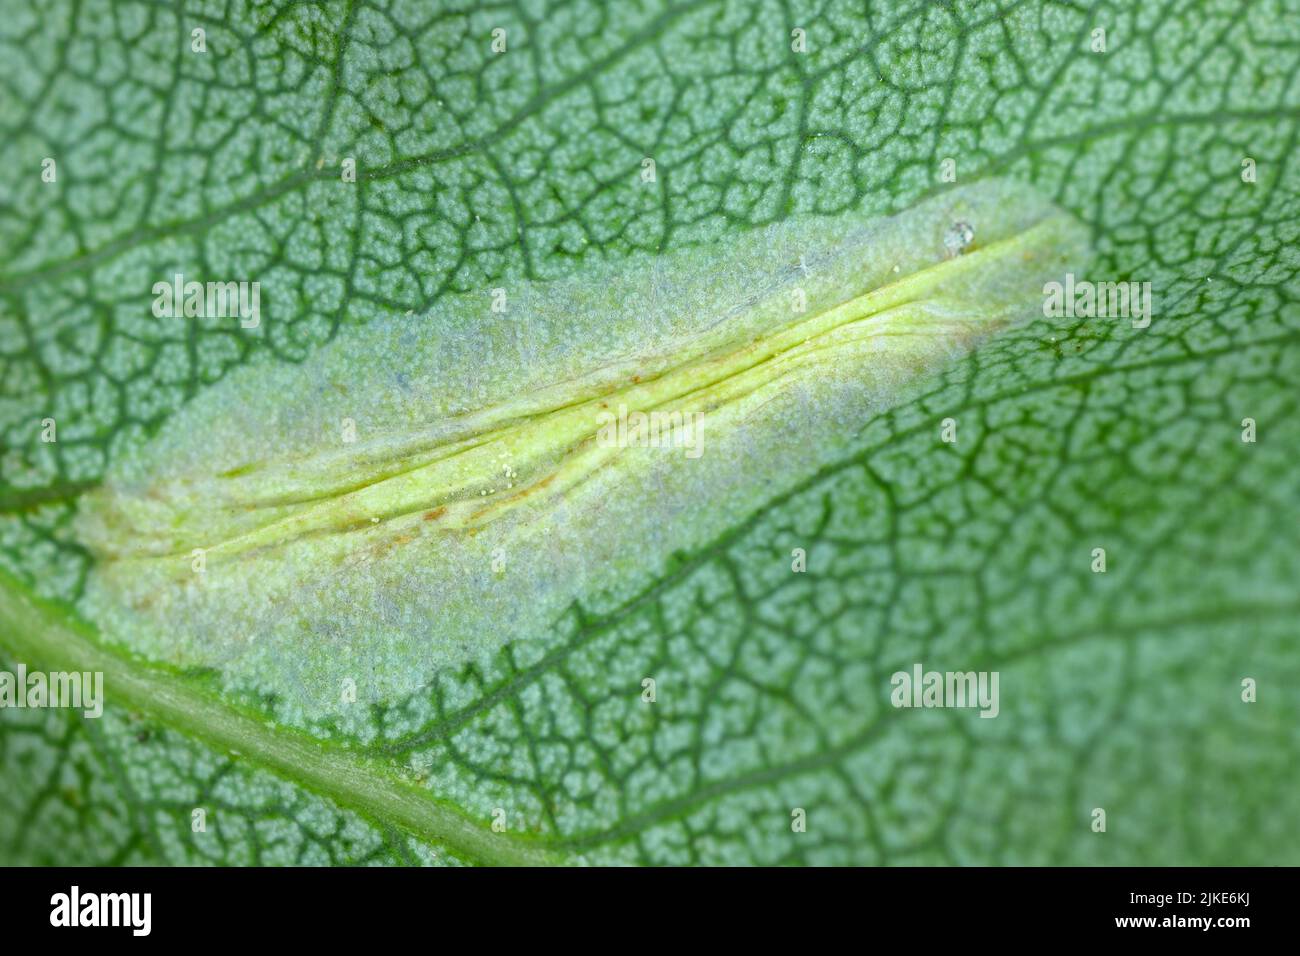 Spotted tentiform leafminer (Phyllonorycter blancardella). Feeding place of caterpillar on apple leaf. Stock Photo